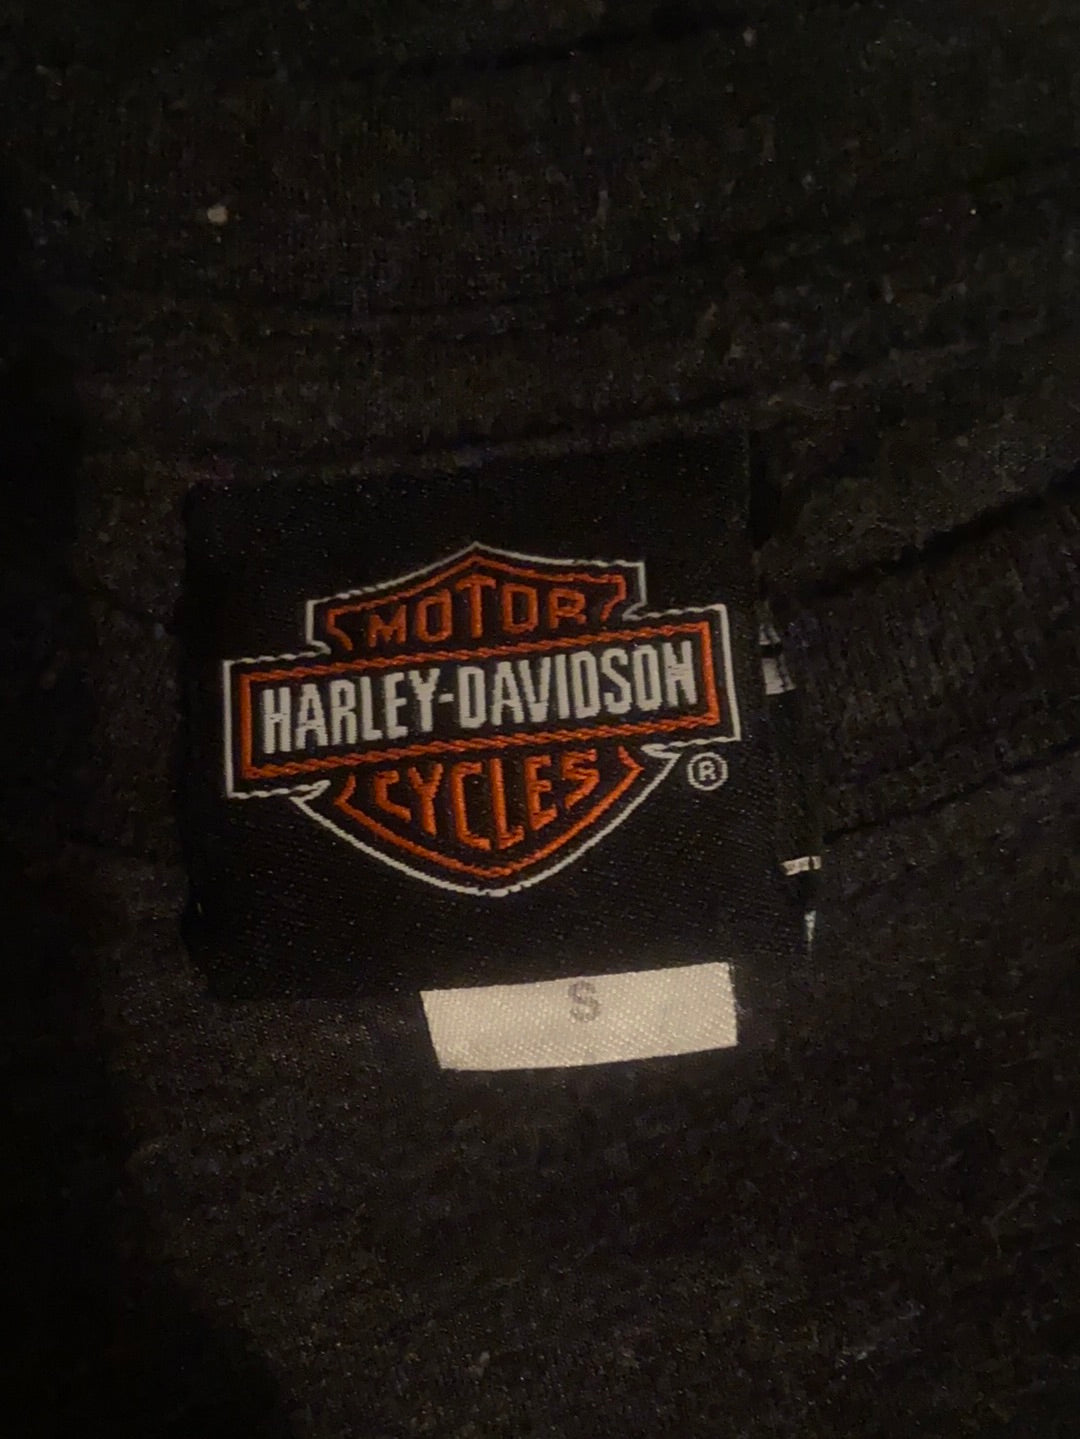 Restyled Harley Davidson Tee - Small